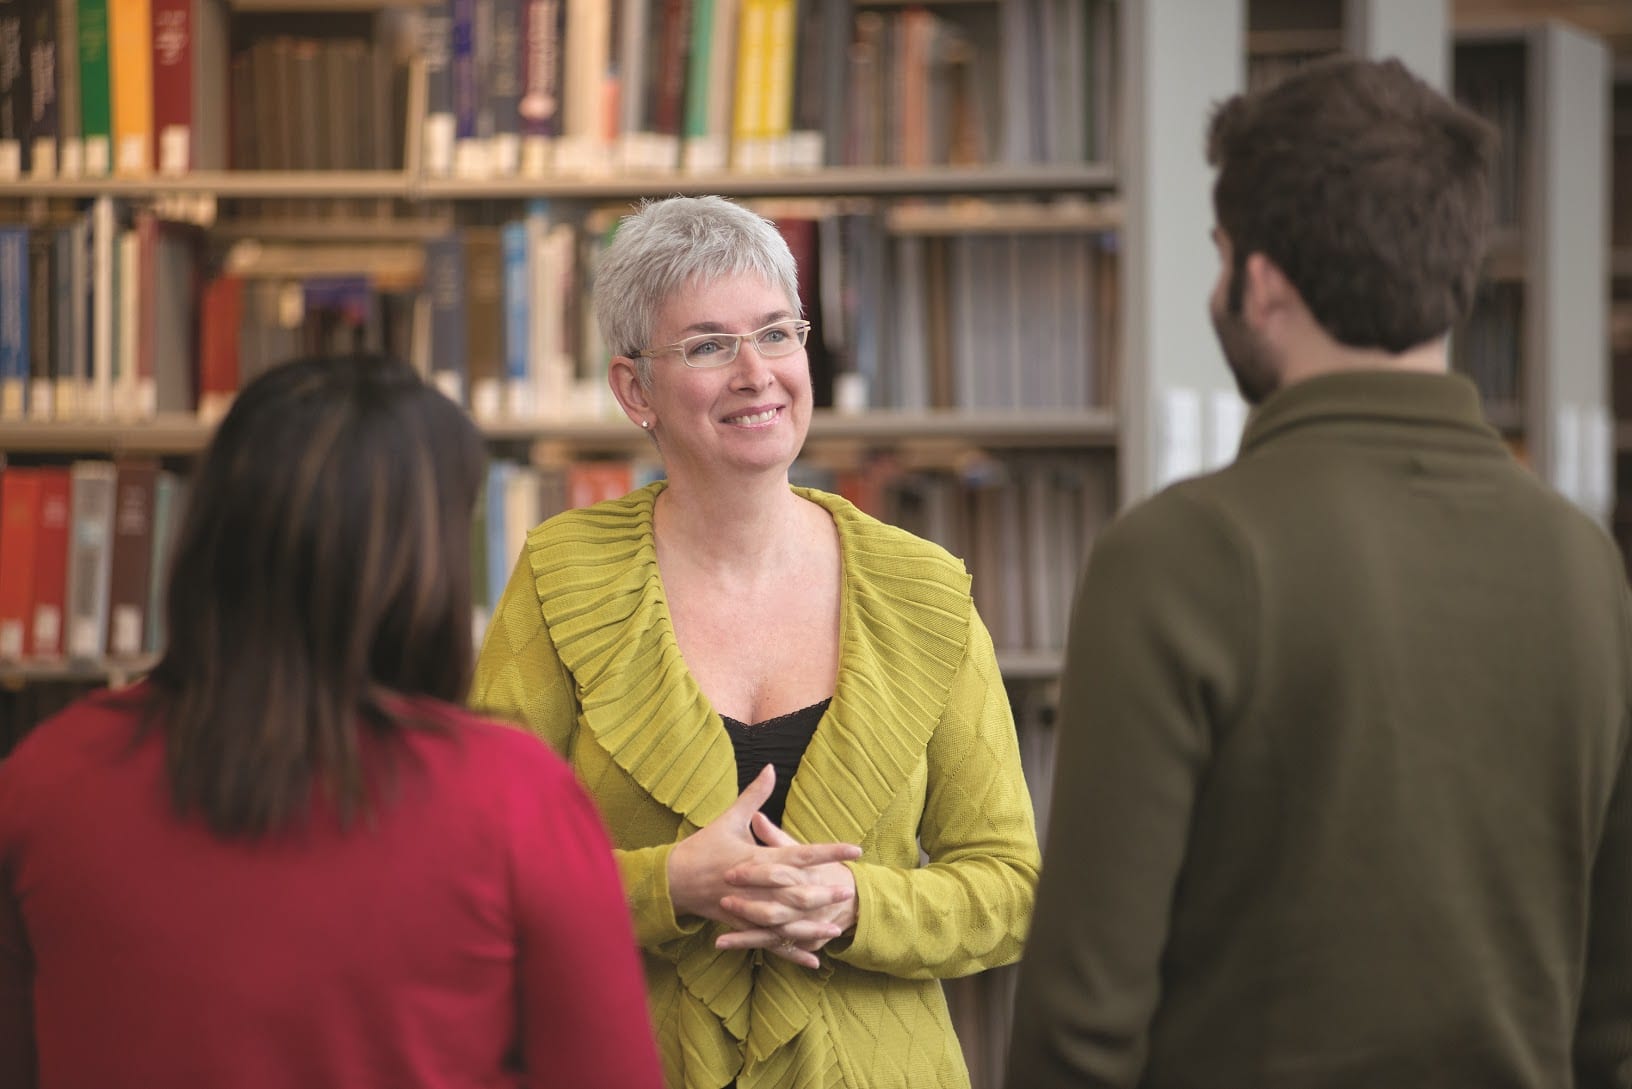 Professor Moren Levesque smiling and speaking with students